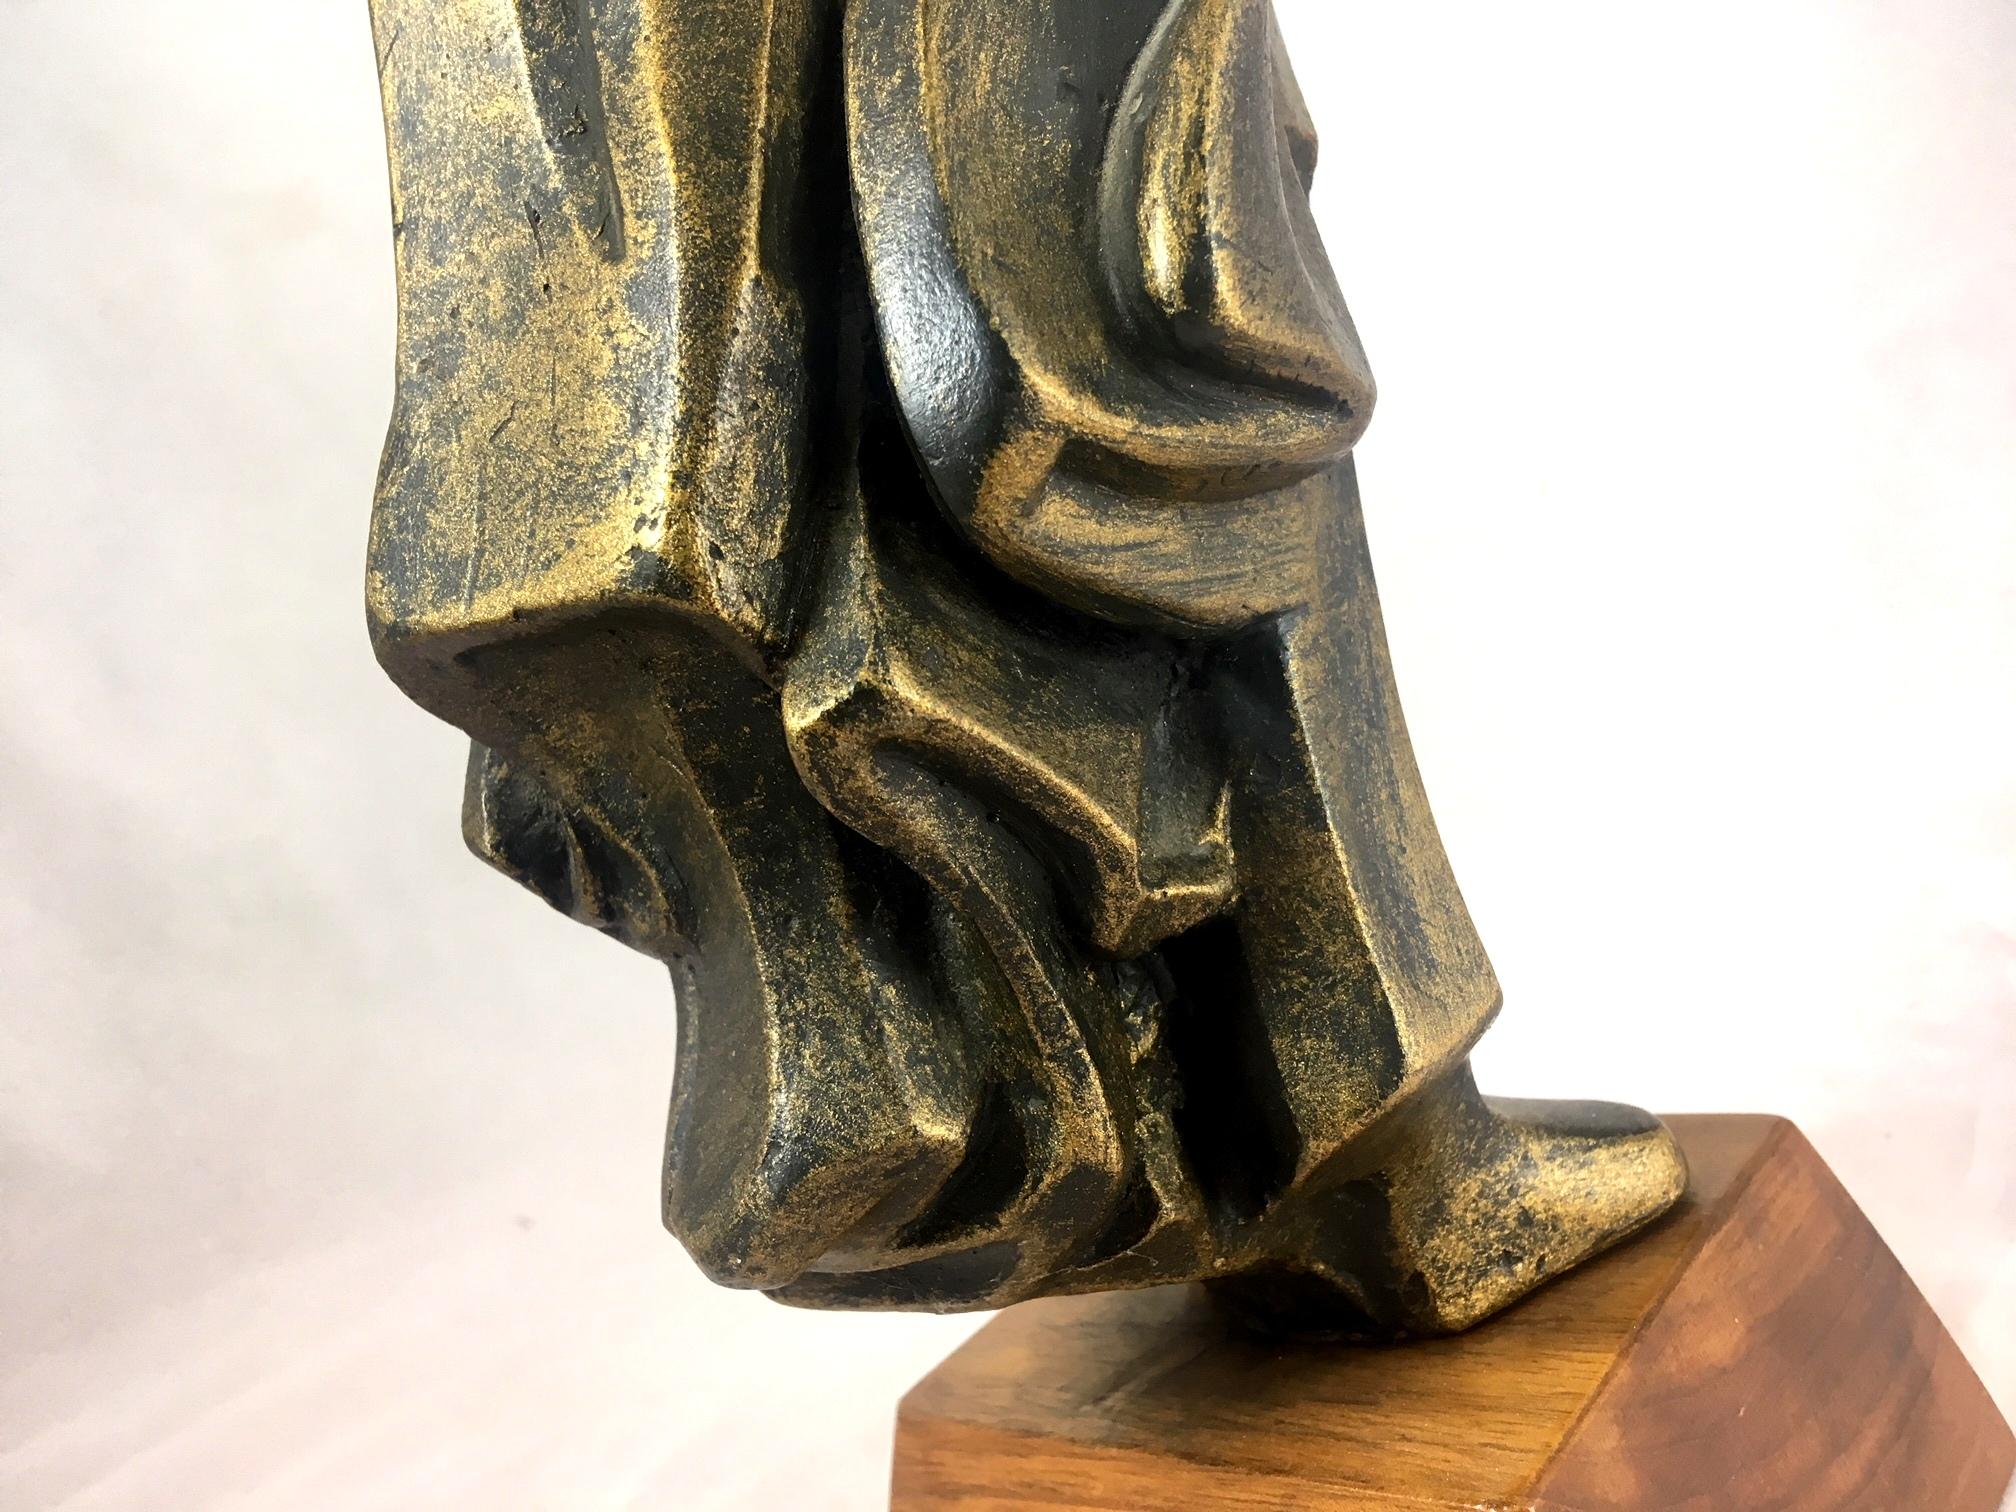 20th Century Art Deco Style Sculpture of Resin on a Wooden Base, 1970s